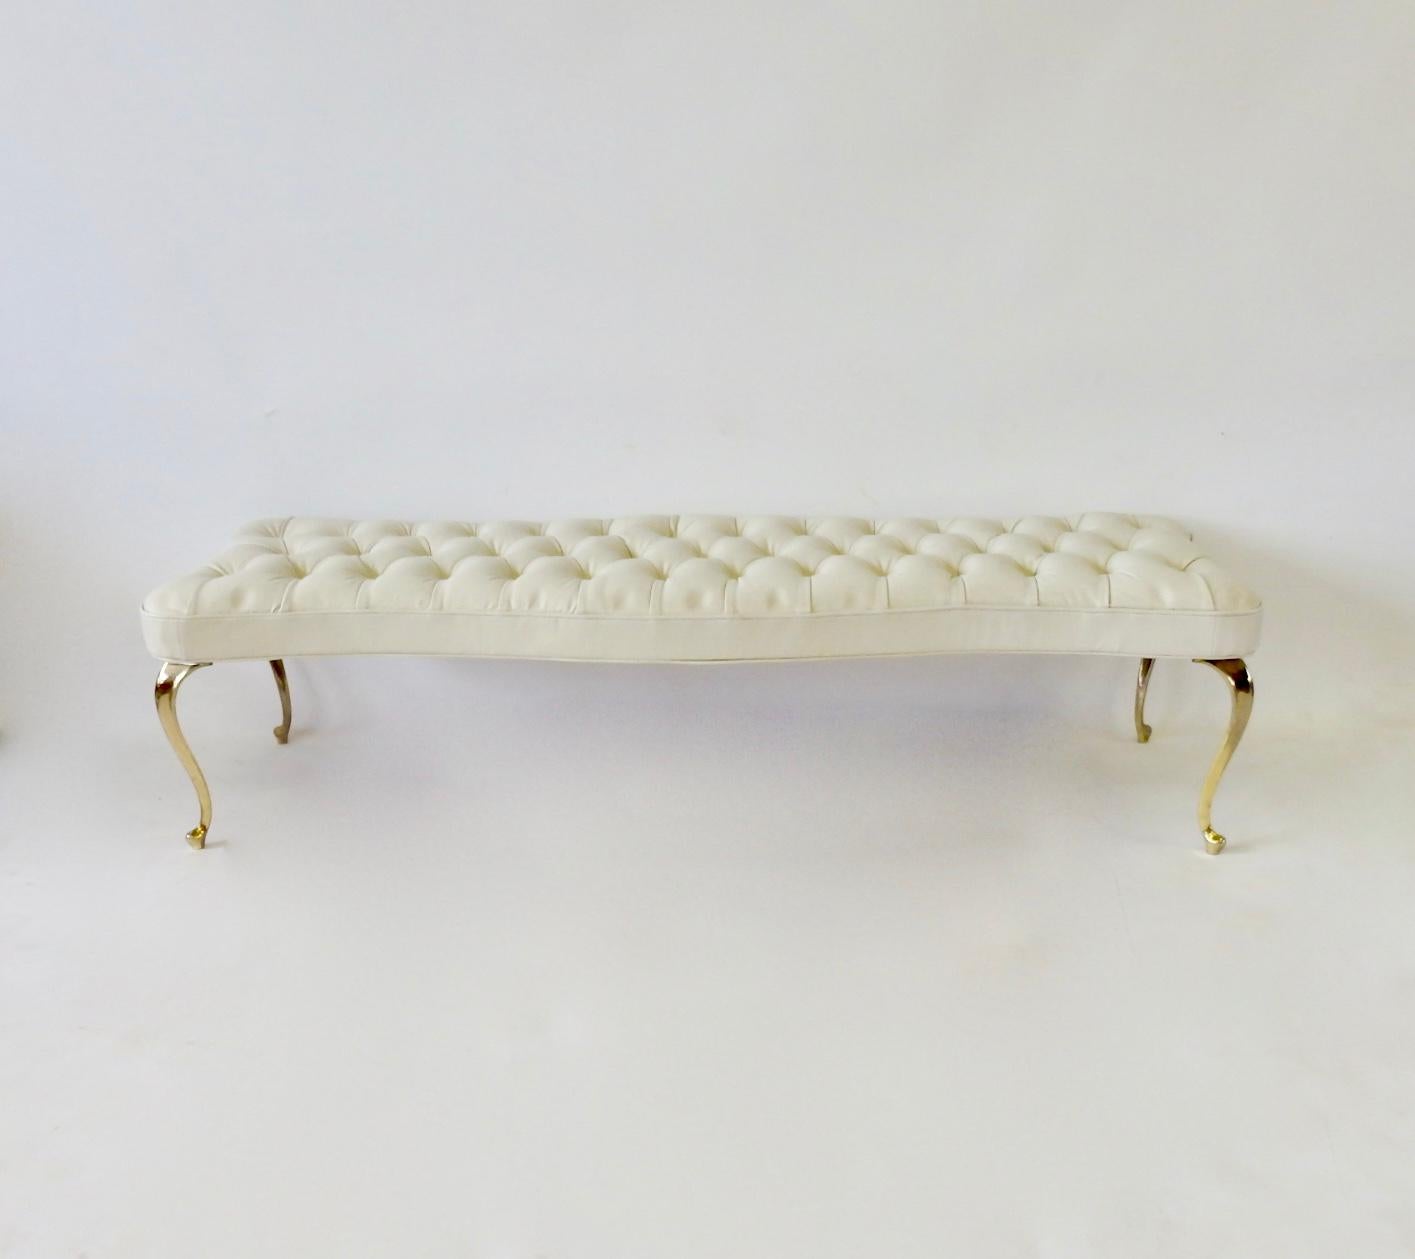 Hollywood Regency bench covered in supple leather like white Naugahyde. Legs are brass plated.